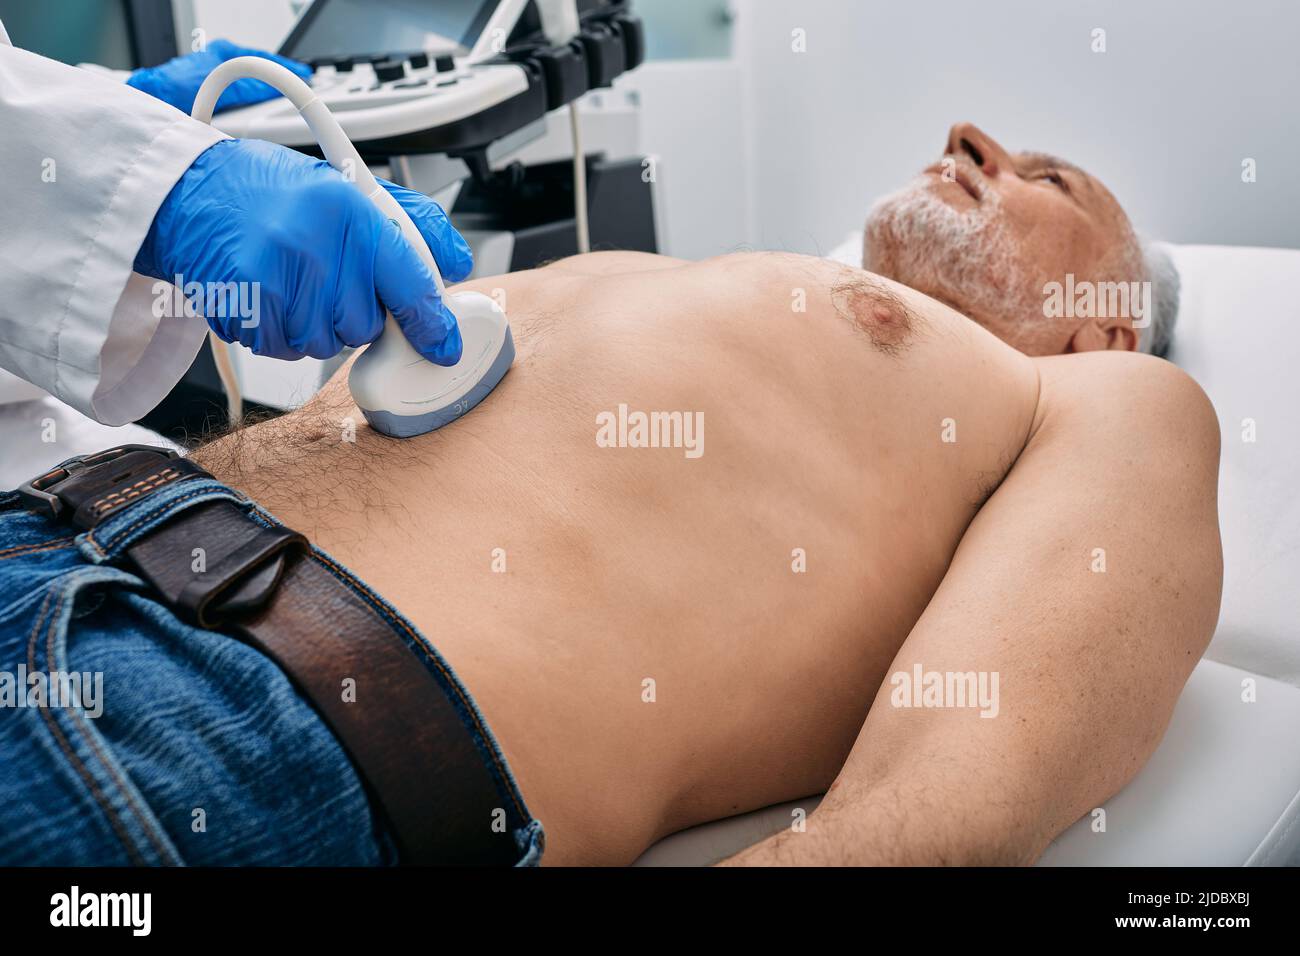 Abdominal ultrasound with ultrasound machine for male patient, close-up Stock Photo